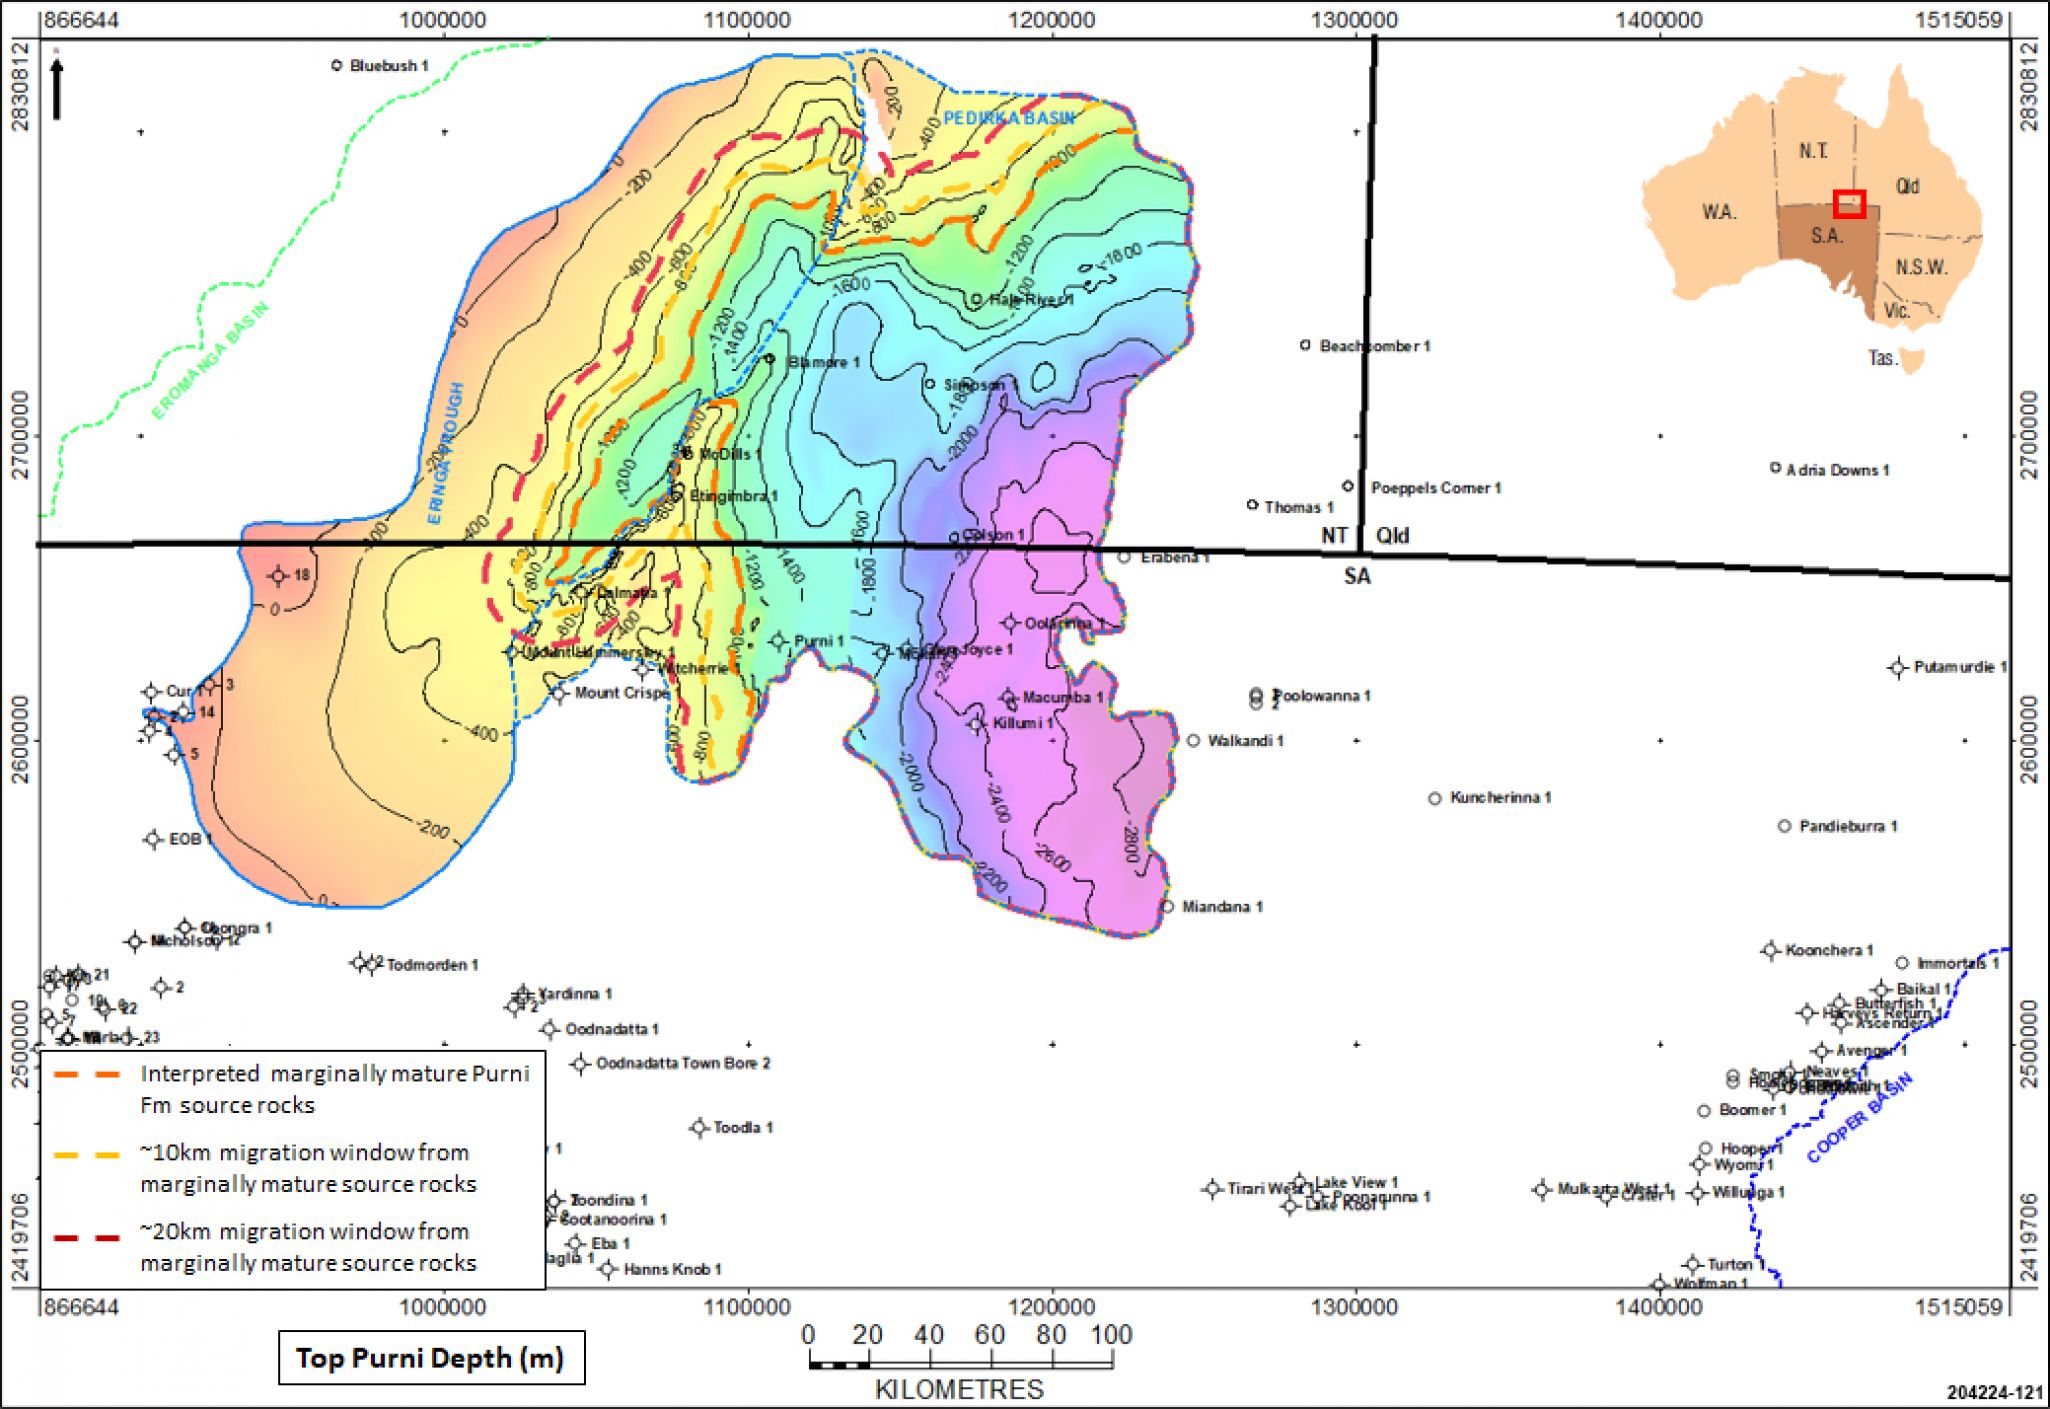 Potential limit of migration extent from marginally mature Purni Formation source rocks in the Pedirka Basin